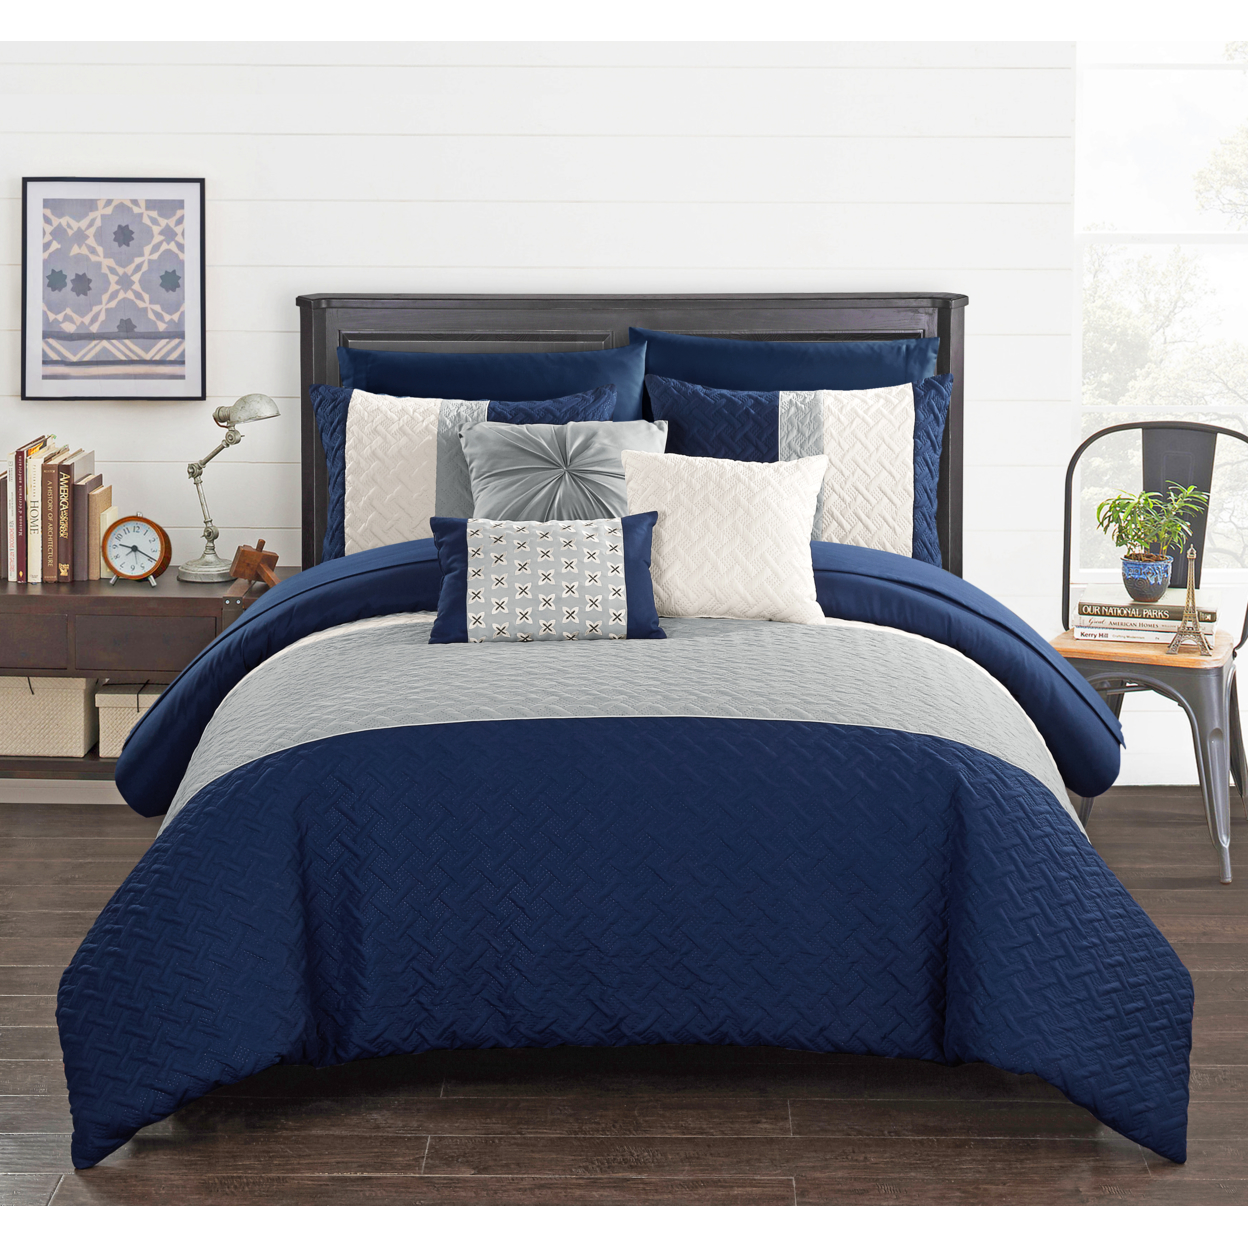 Chic Home Shaila 10 Or 8 Piece Comforter Set Color Block Quilted Embroidered Design Bed In A Bag Bedding - Navy, Queen